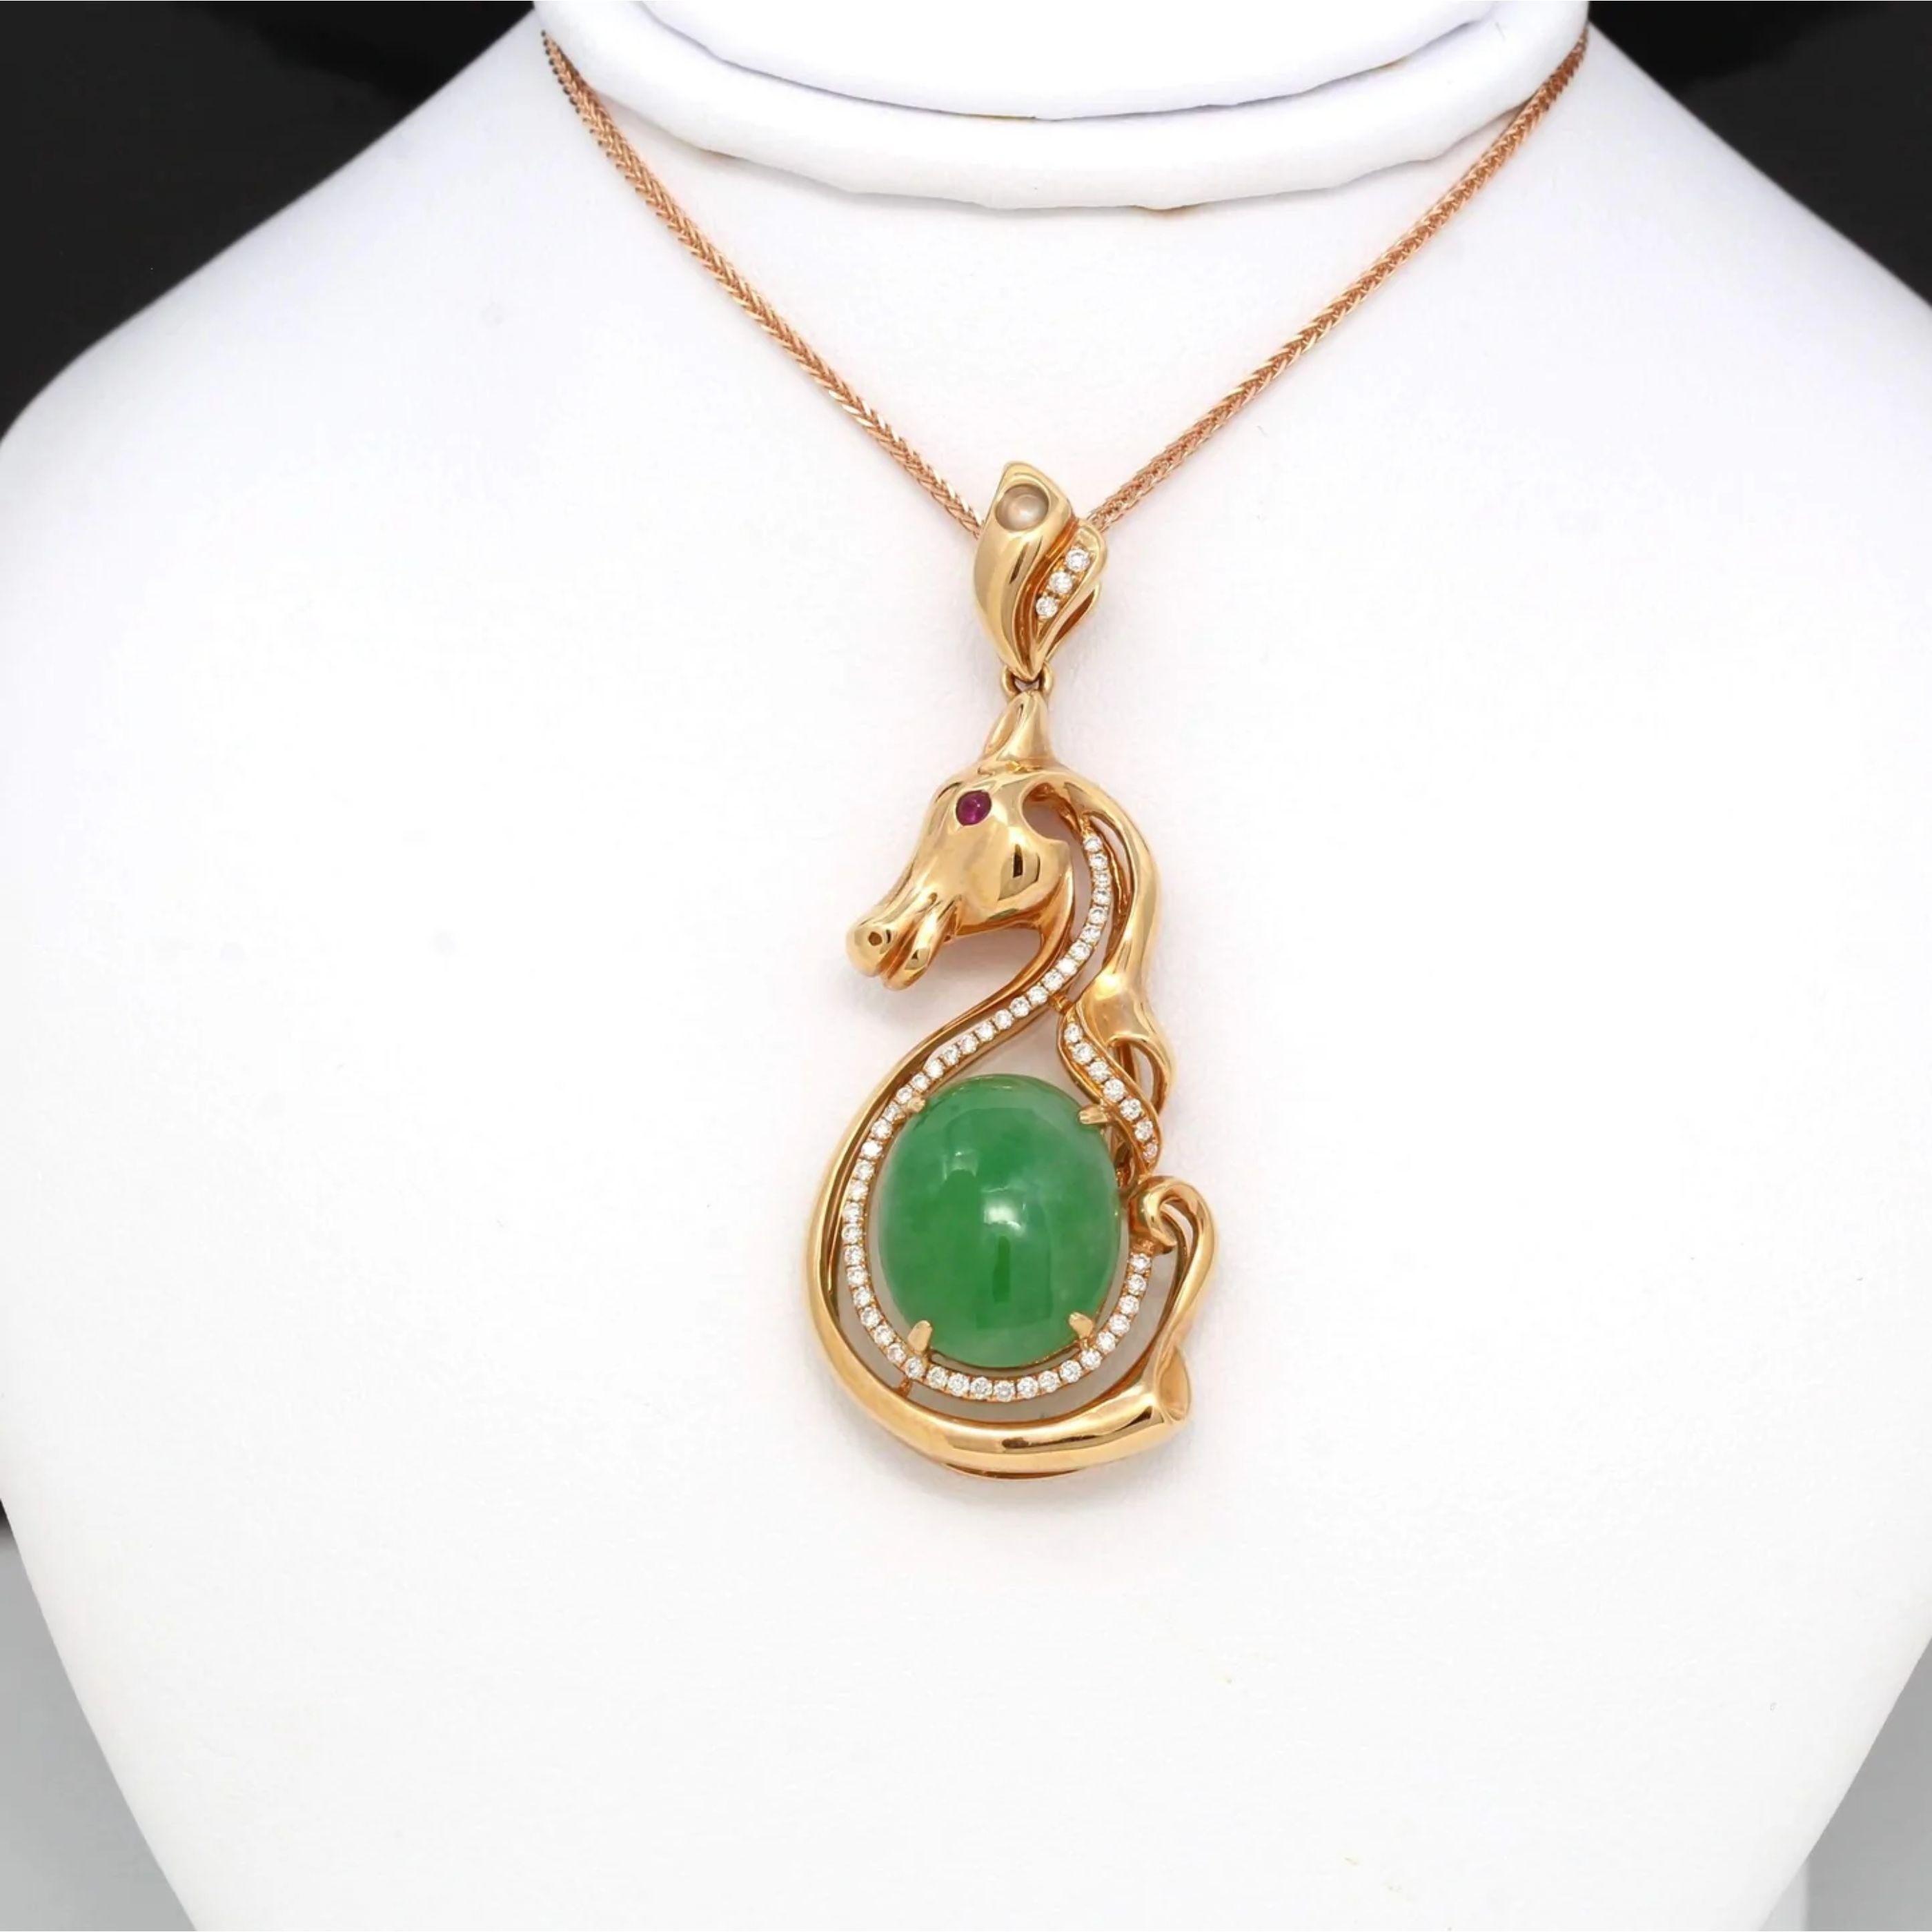 Design concept--- 18k Rose Gold & Genuine Burmese Imperial Jadeite Pendant Necklace With AA Tourmaline and SI Diamonds. This pendant made with high-quality genuine imperial jadeite. And it's translucent with a watery texture. The imperial jadeite